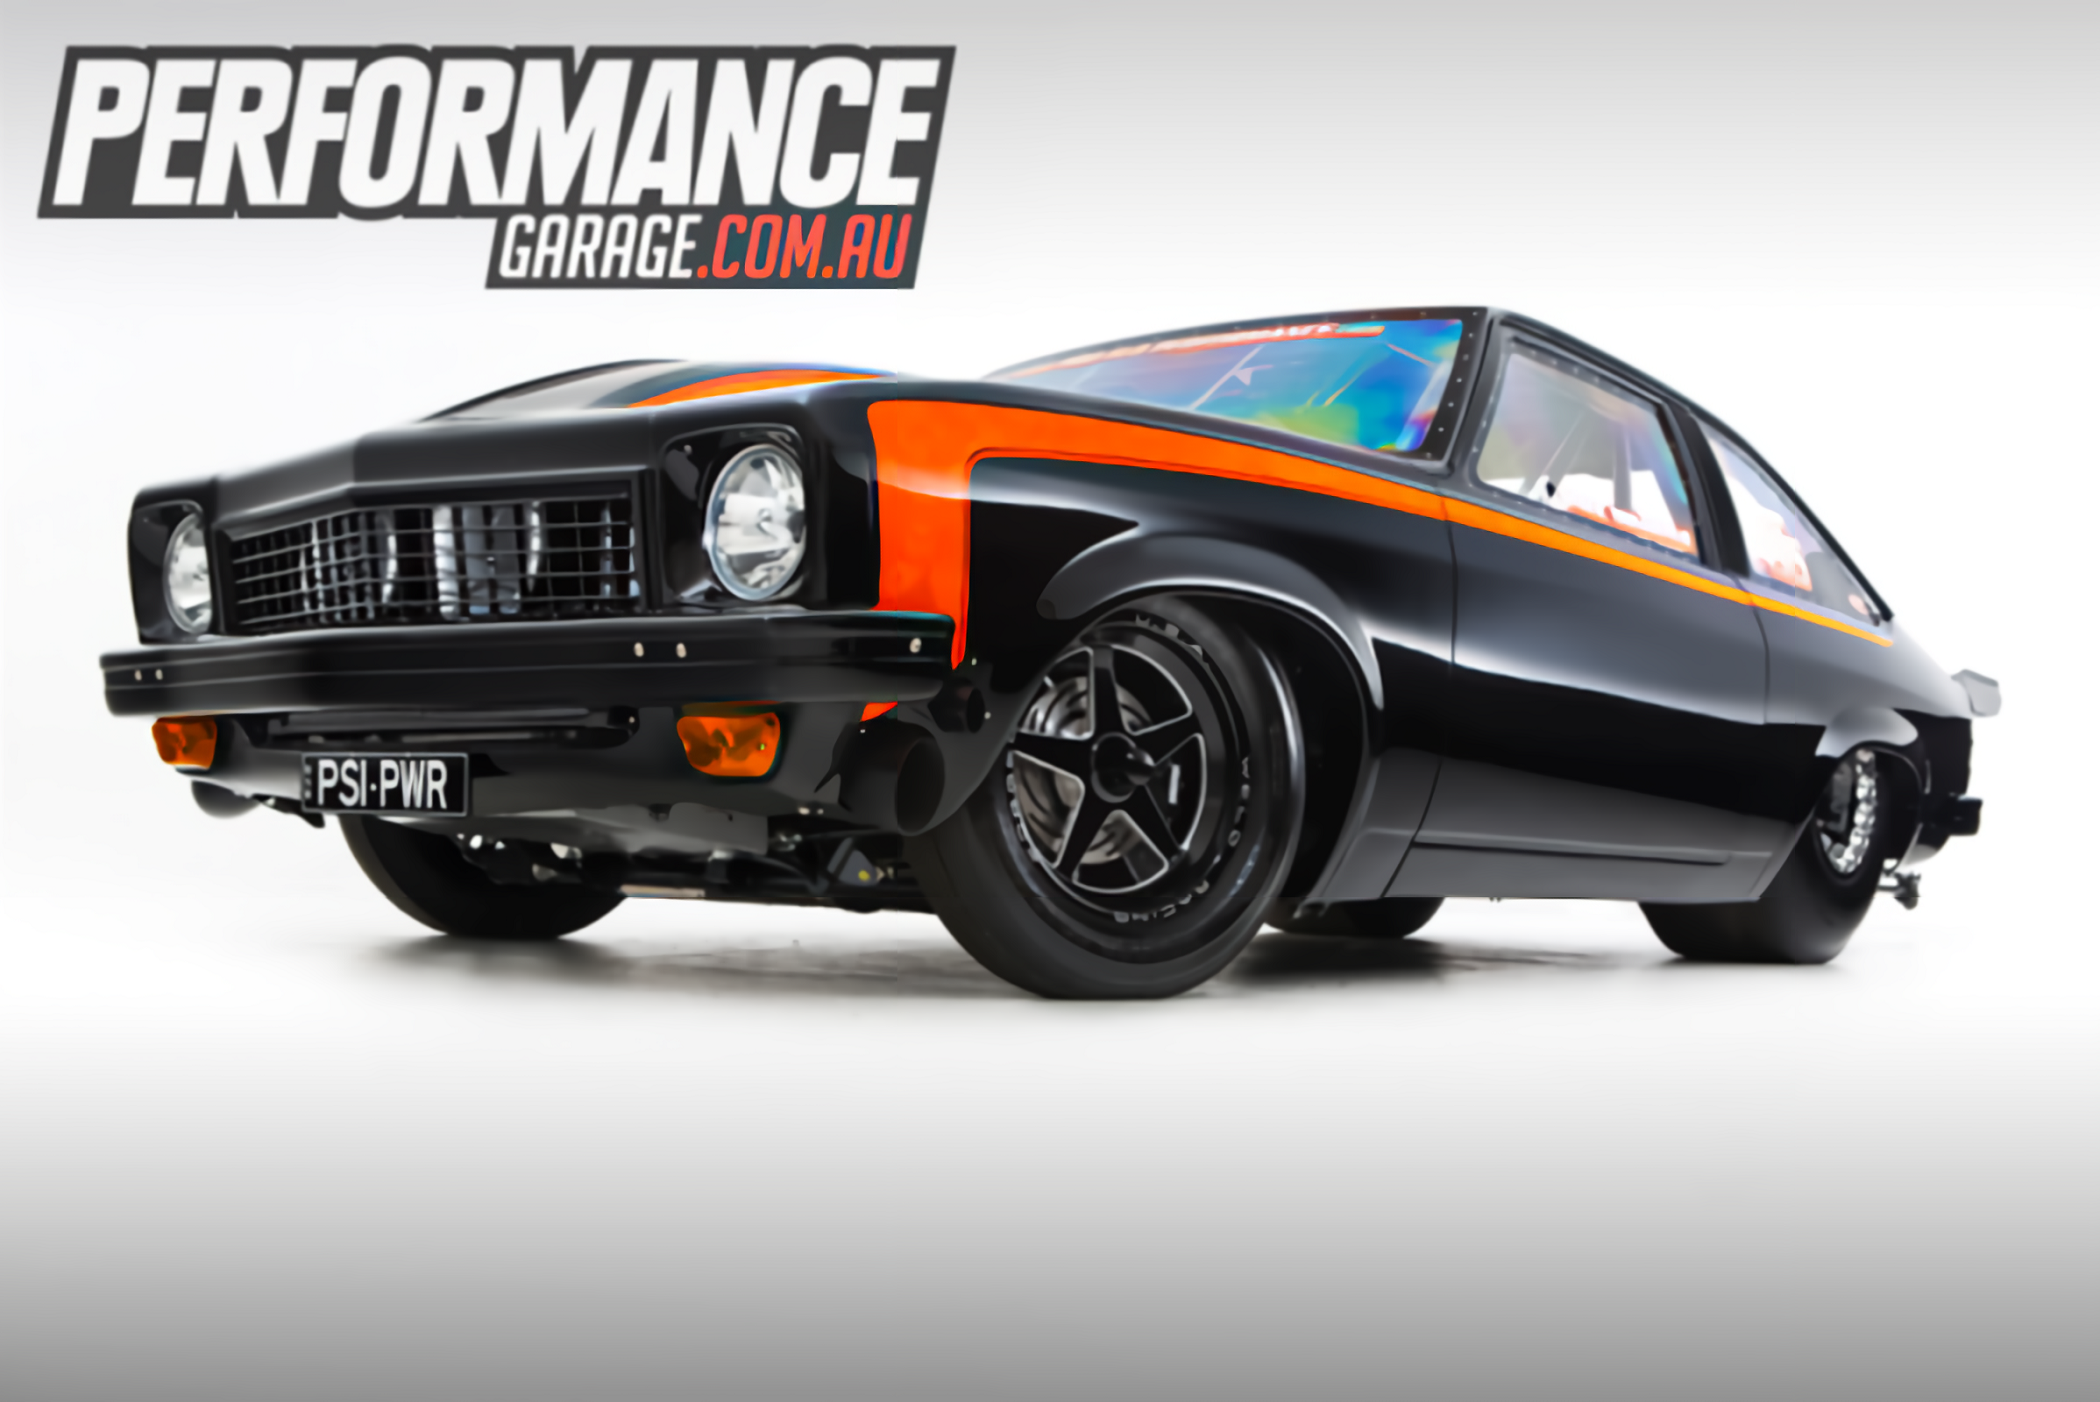 2000HP of Aussie Muscle